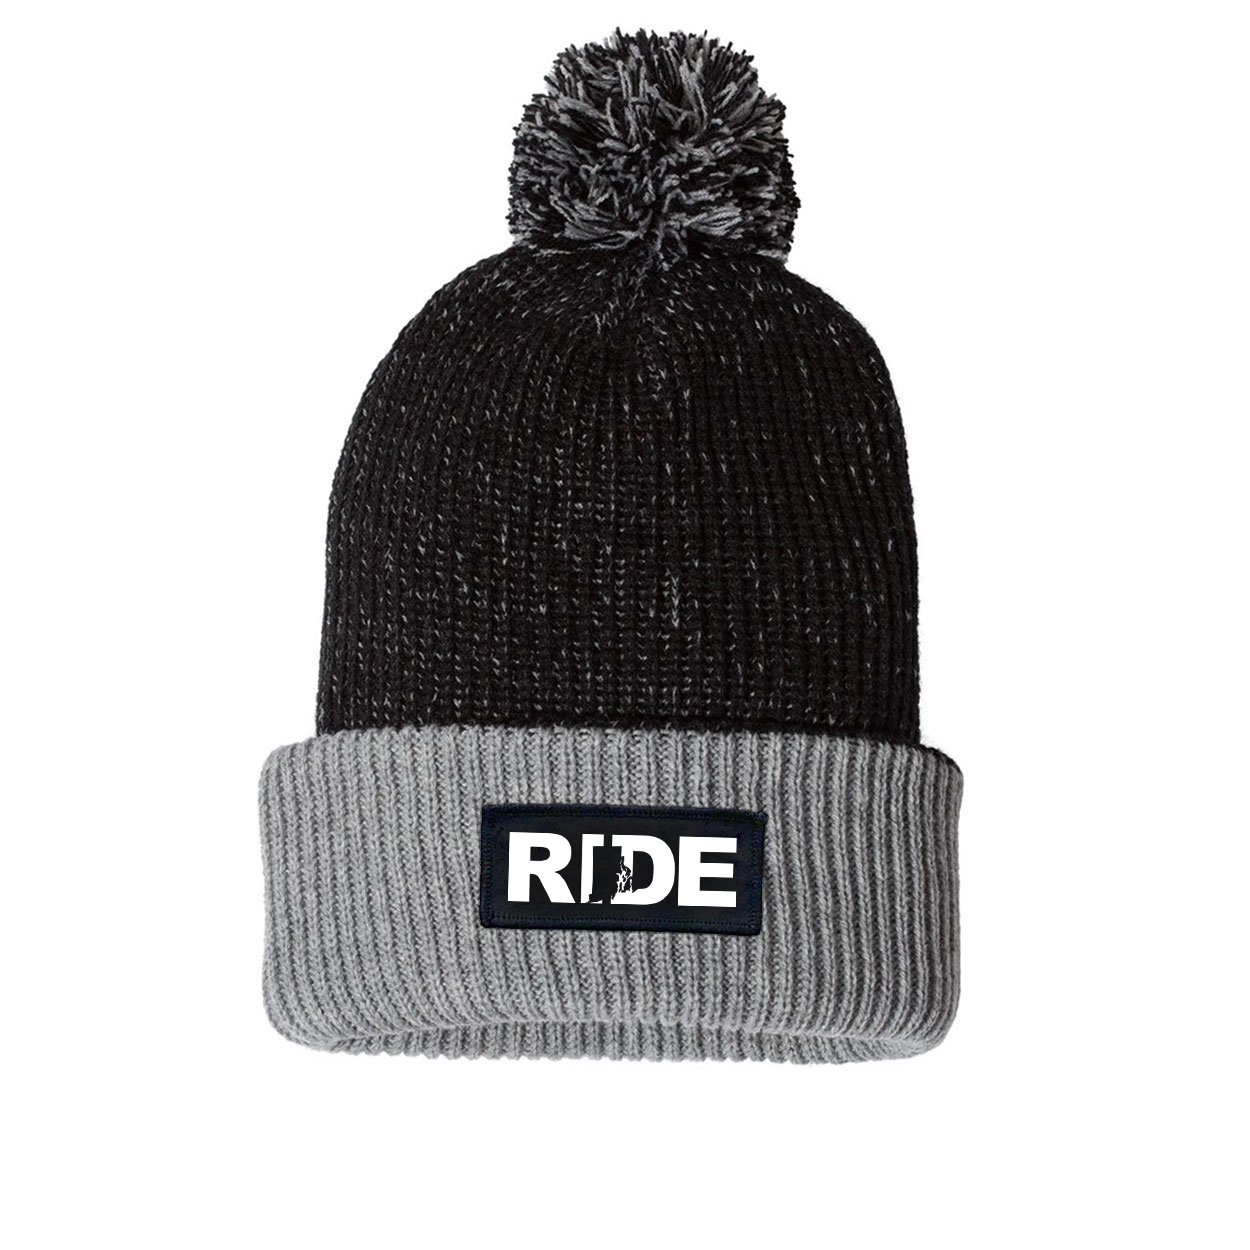 Ride Rhode Island Night Out Woven Patch Roll Up Pom Knit Beanie Black/Gray (White Logo)